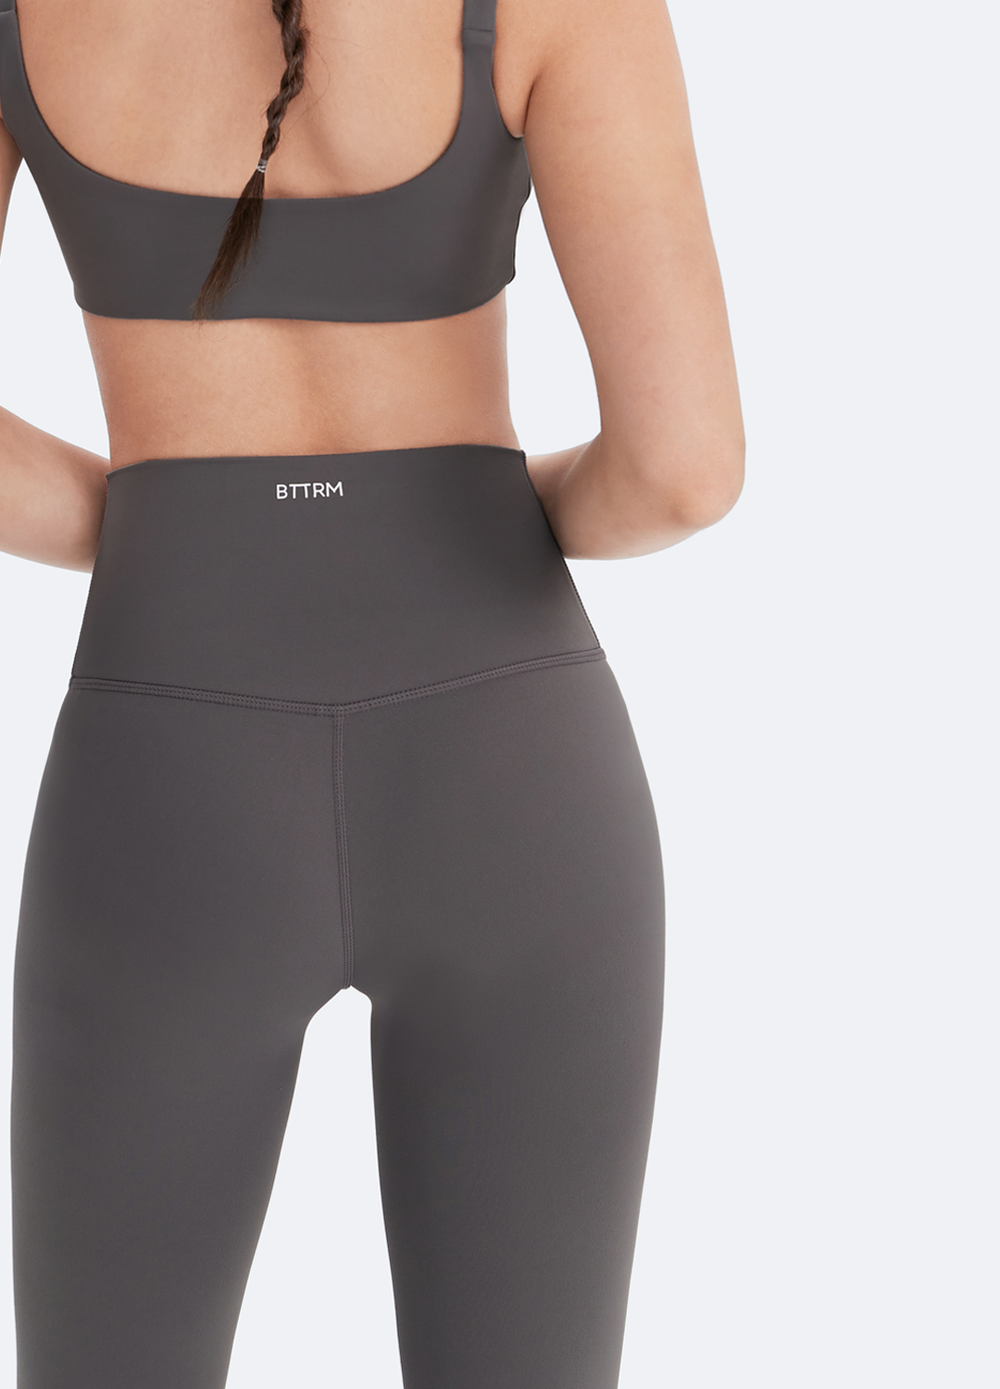 BetterMe 7/8 High Waisted Leggings and Bra with Cutout at the Back